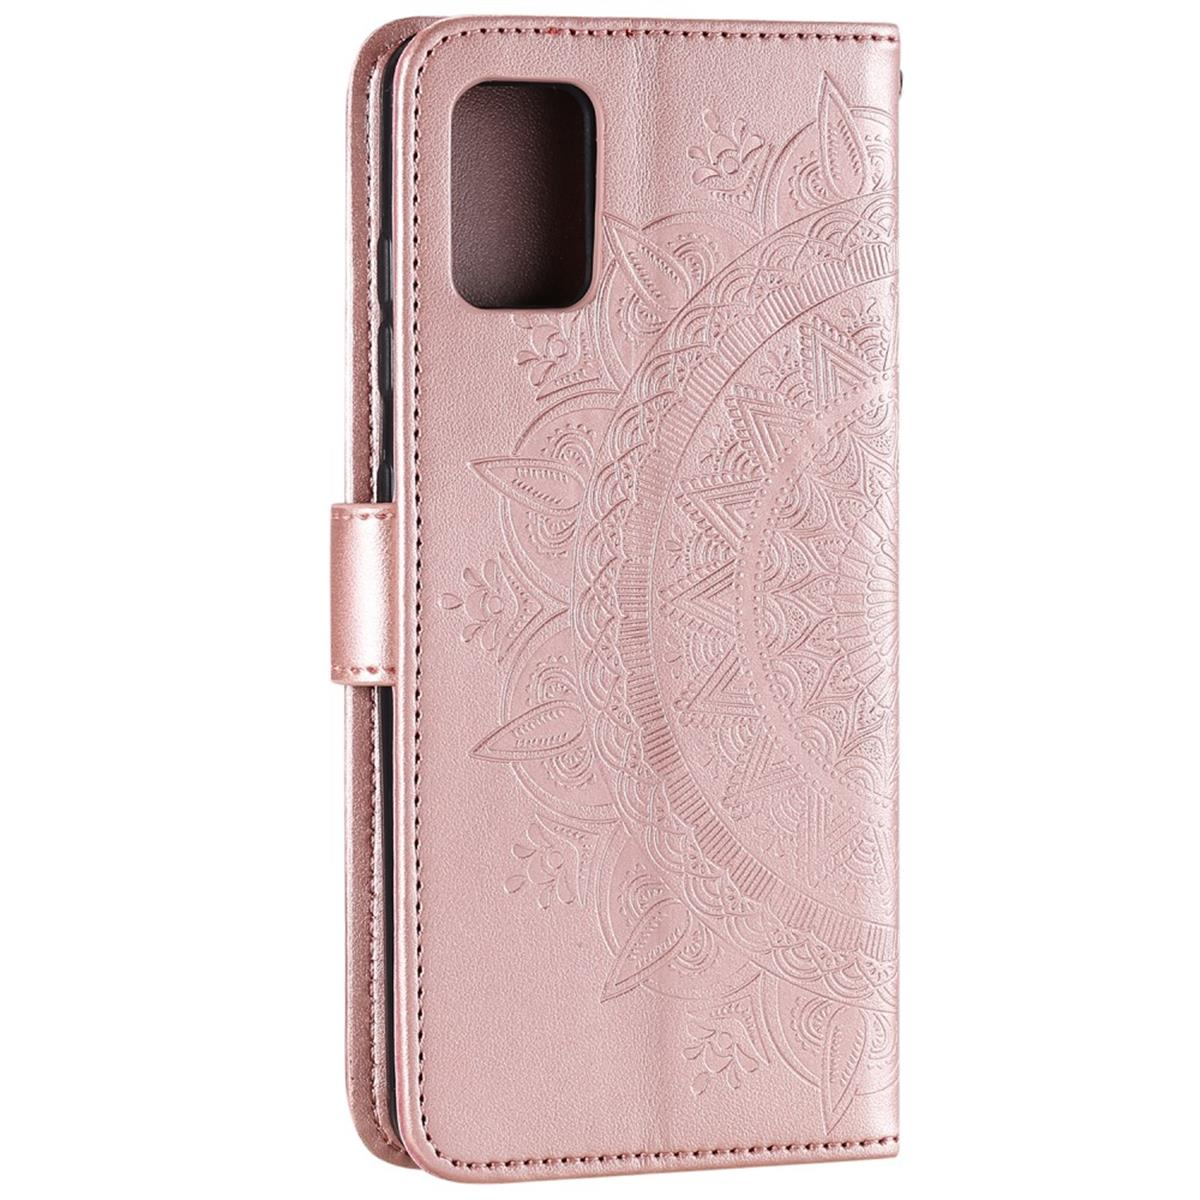 COVERKINGZ Klapphülle Samsung, Roségold Muster, A51, Bookcover, Galaxy mit Mandala